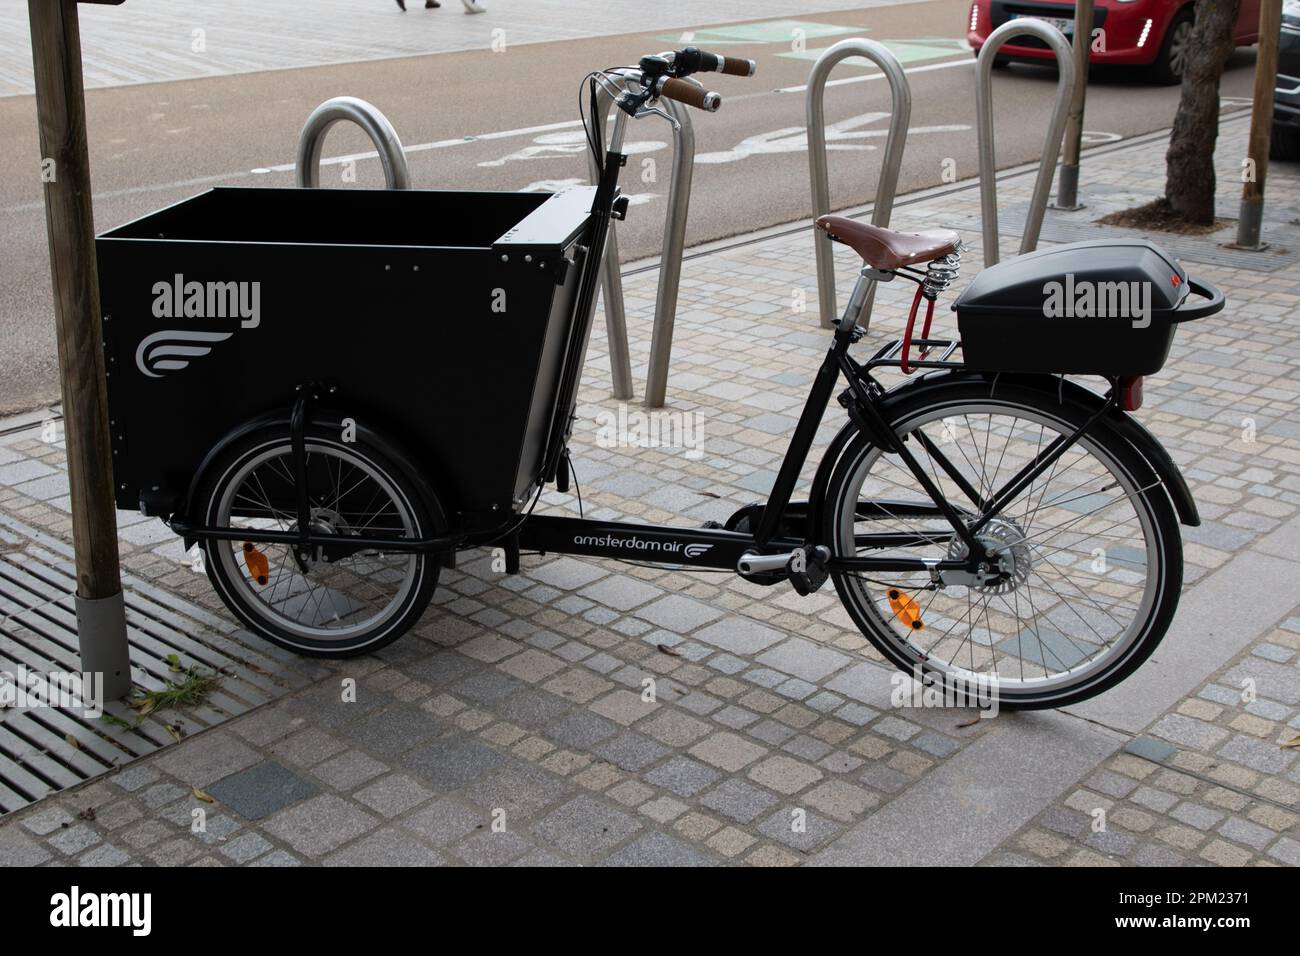 Bordeaux , Aquitaine France - 04 02 2023 : Amsterdam Air cargo bike bicycle  large basket modern fashion urban transportation parked in city Stock Photo  - Alamy